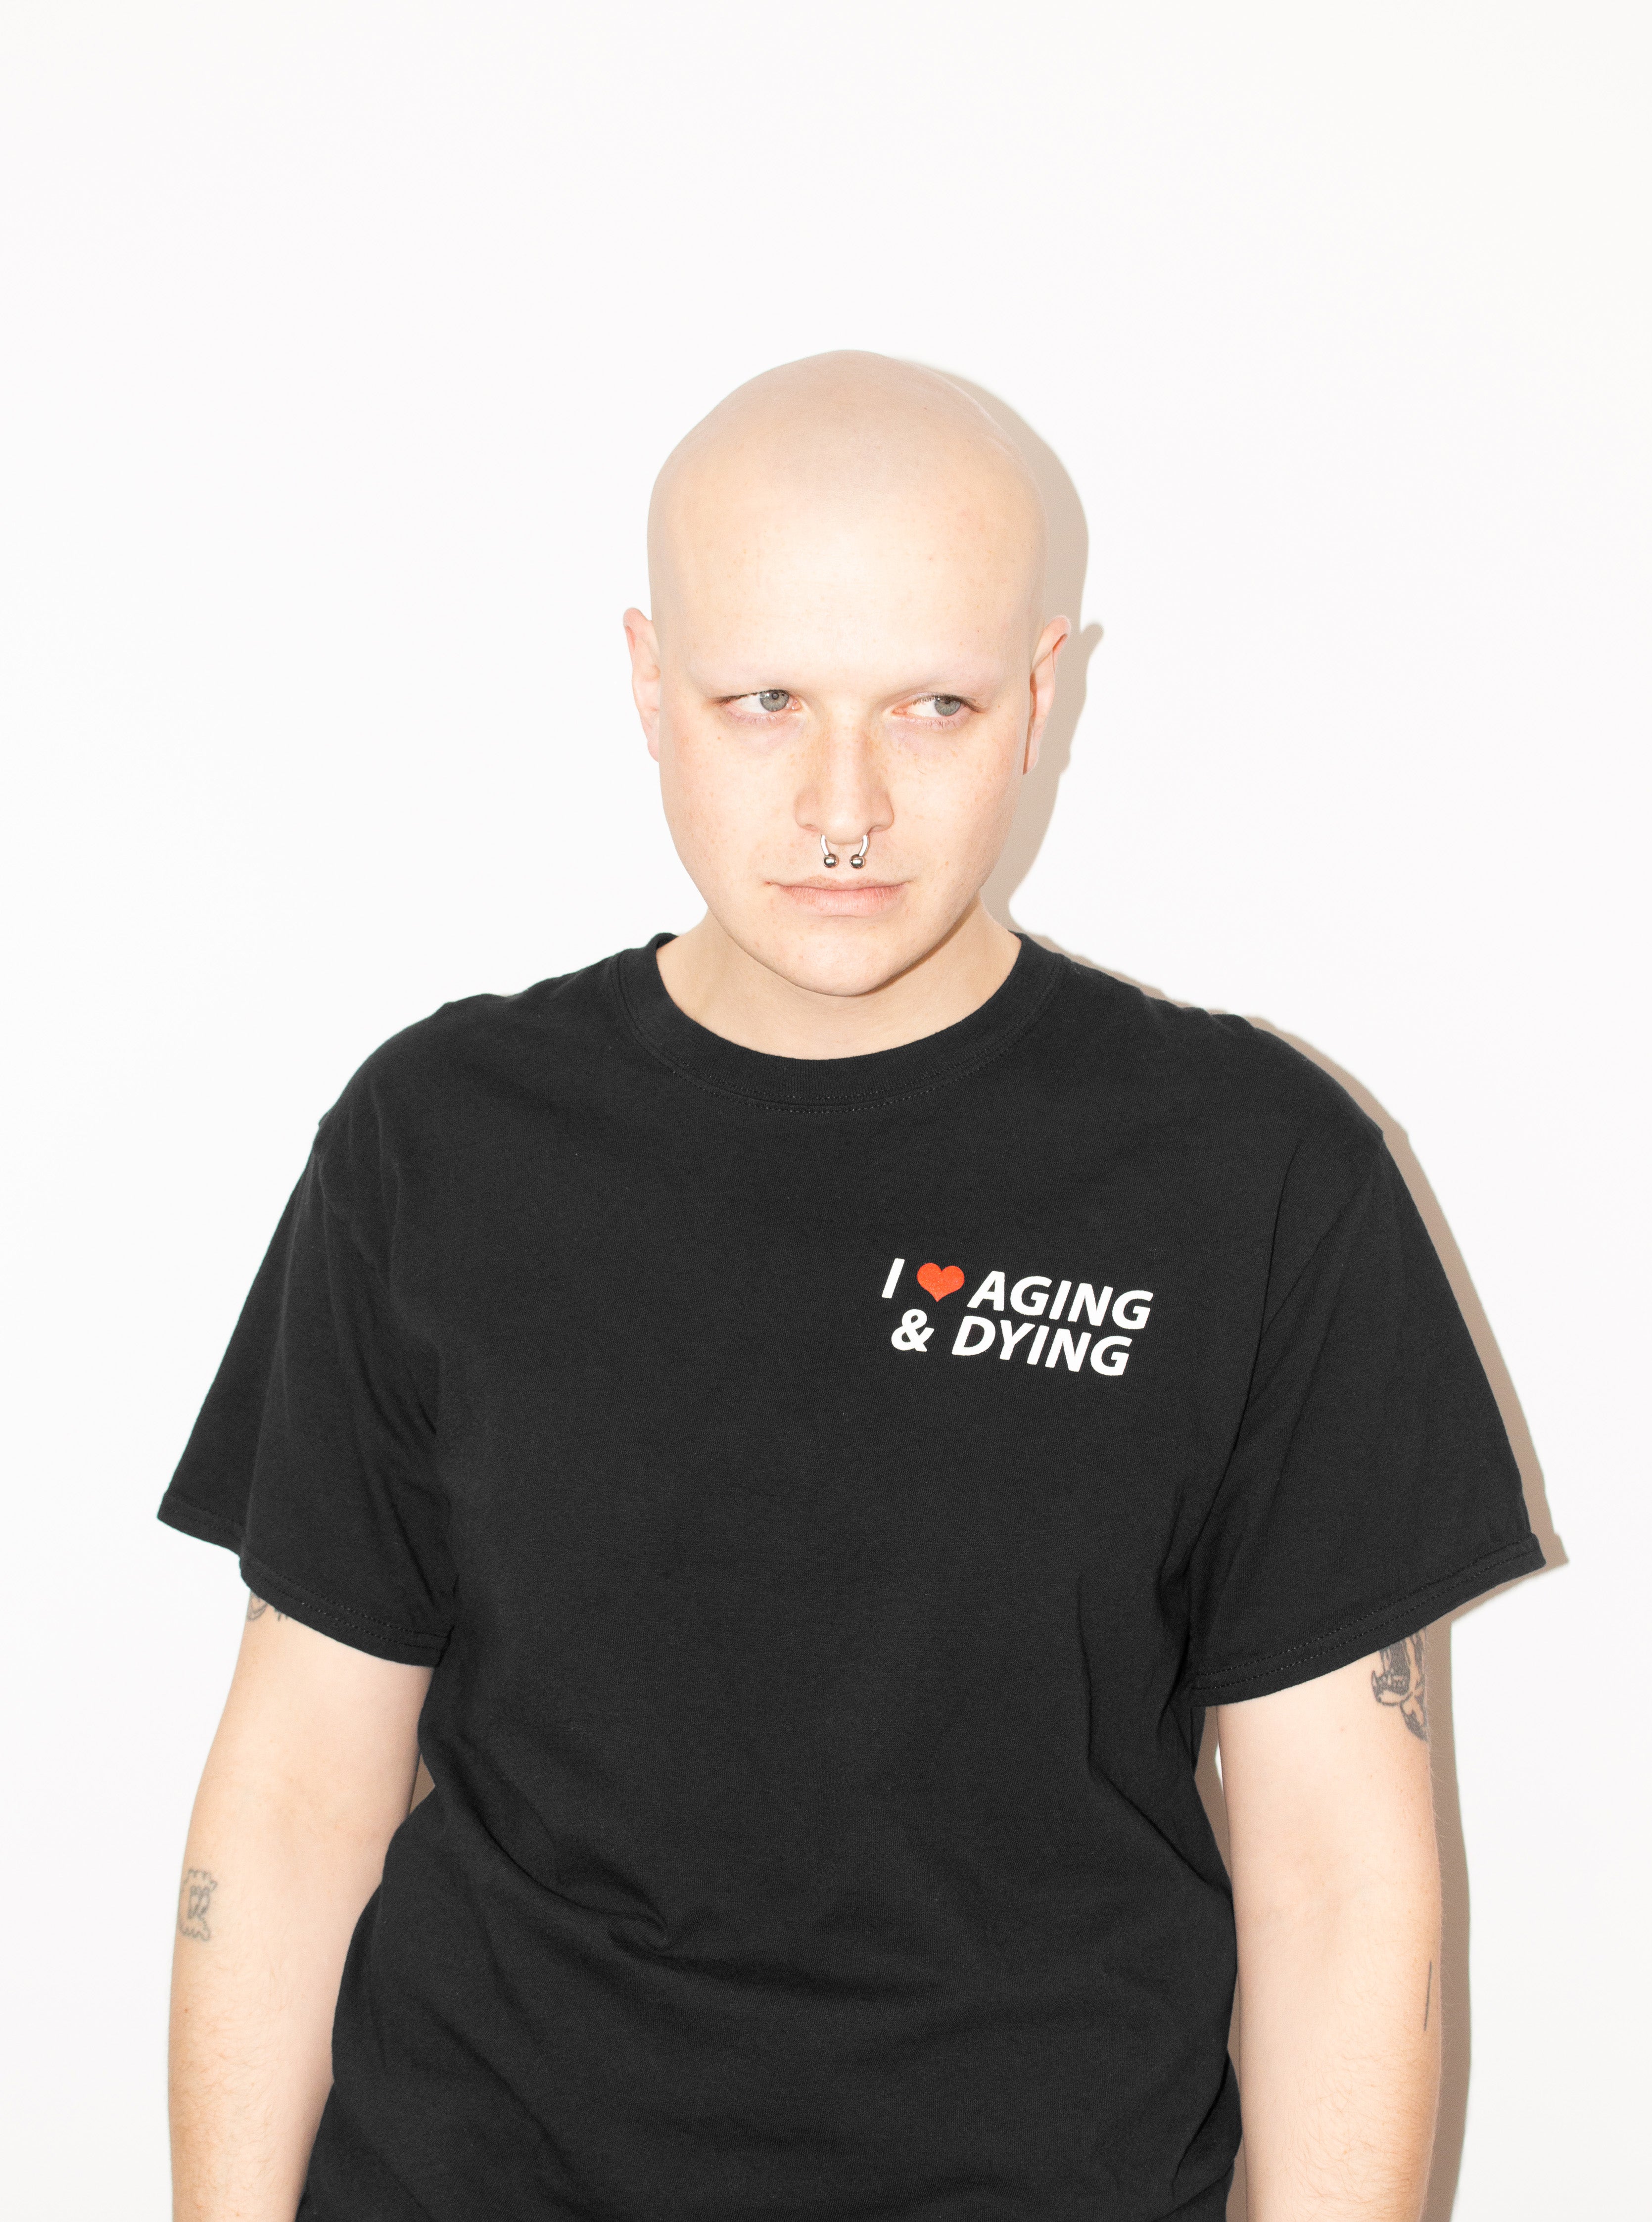 The original "Aging & Dying" T-shirt by No Fun®.  T-shirt is black, and is photographed on a model standing against a white background.  The left chest print text reads "I ❤️ Aging & Dying" and is located on the front of the T-shirt.   The text is white, with a red heart.